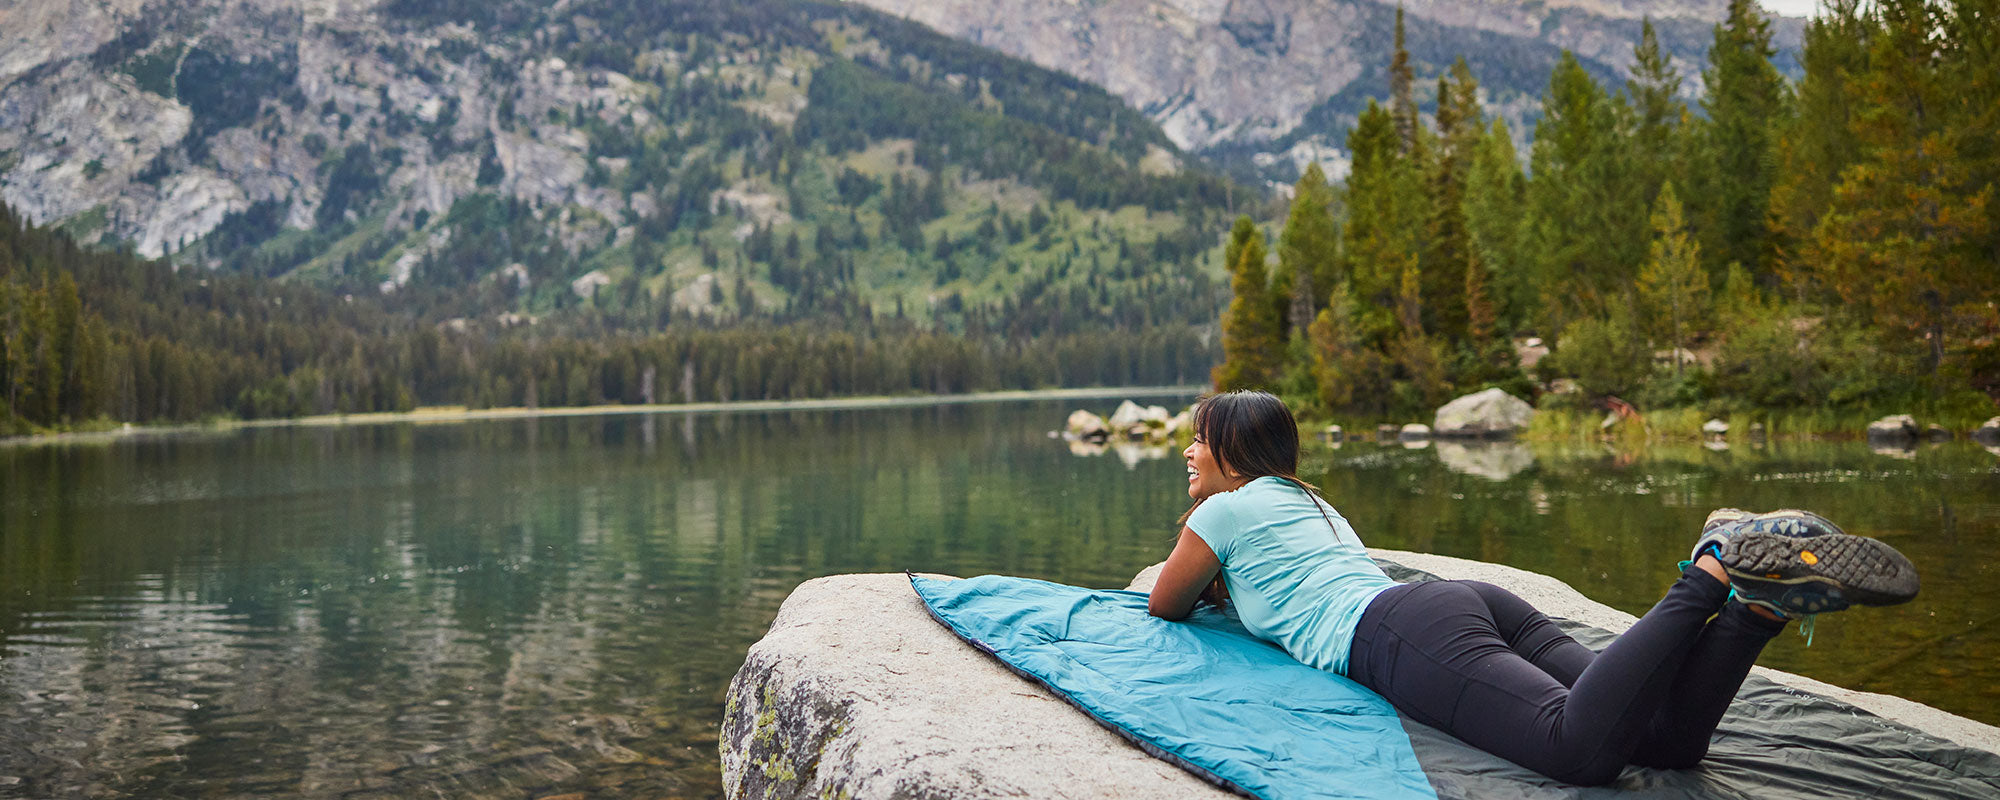 A woman laying on her blanket near a lake.